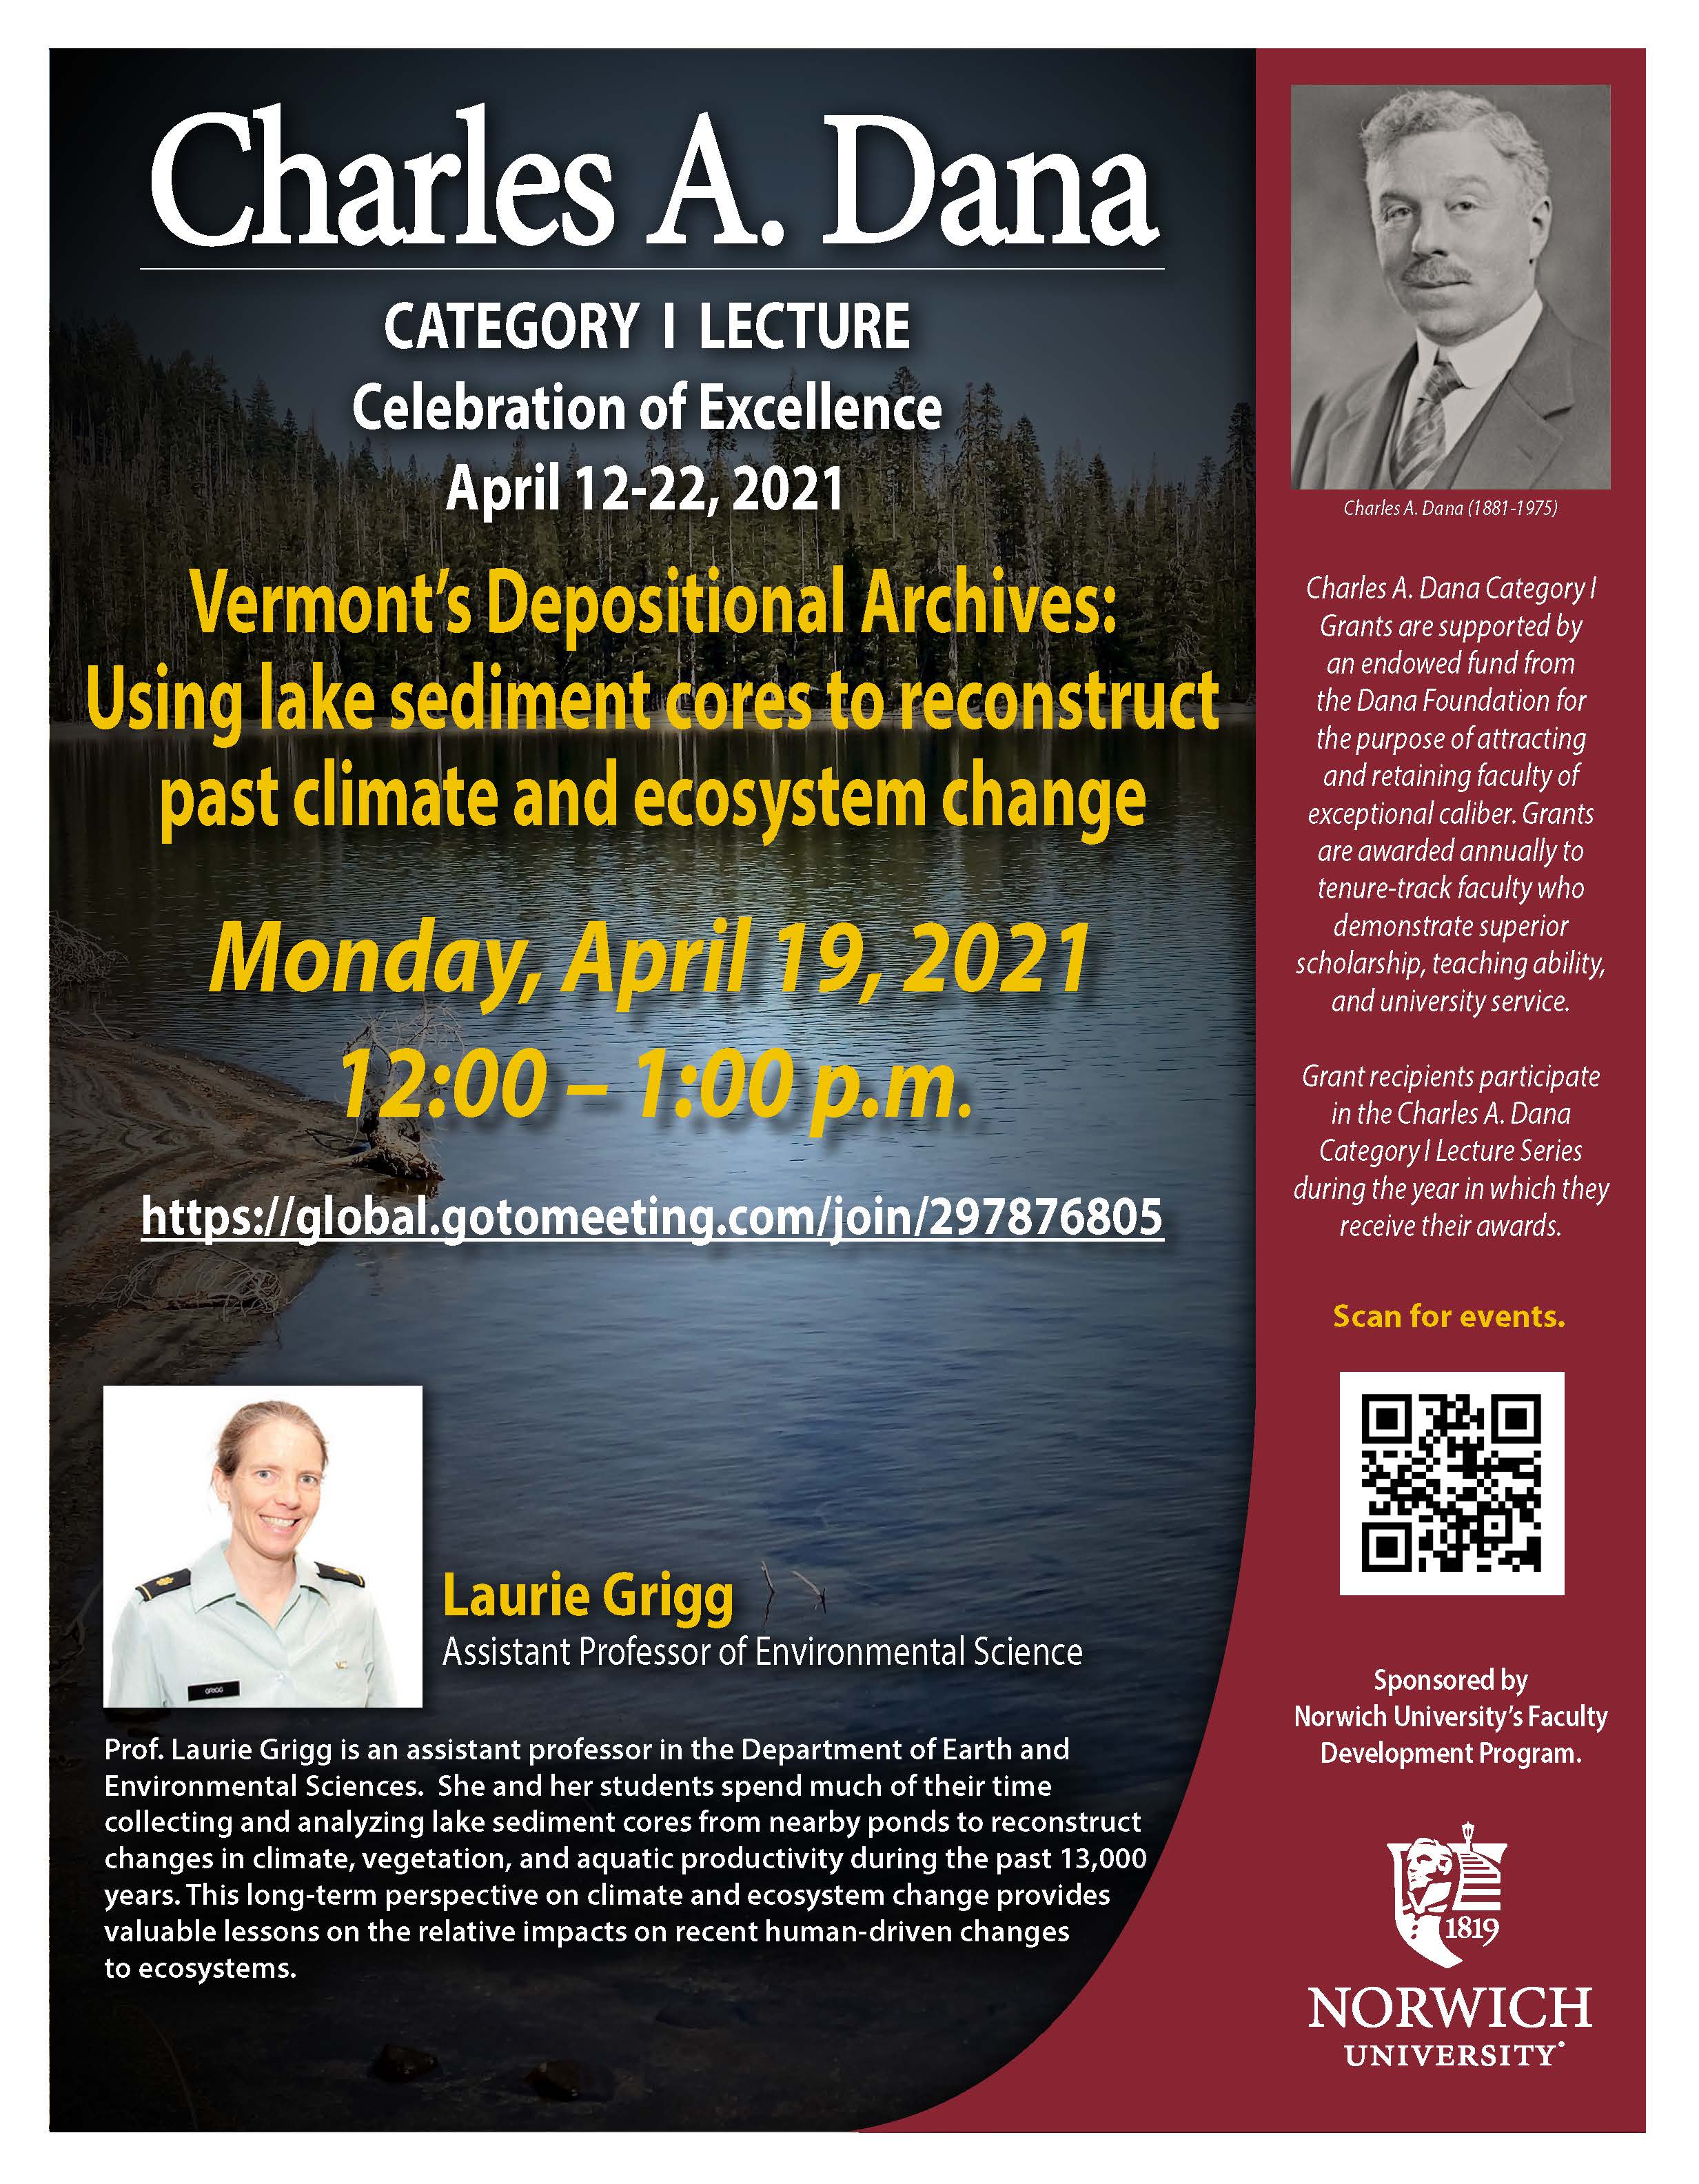 Showcase Image for Vermont’s Depositional Archives: Using lake sediment cores to reconstruct past climate and ecosystem change